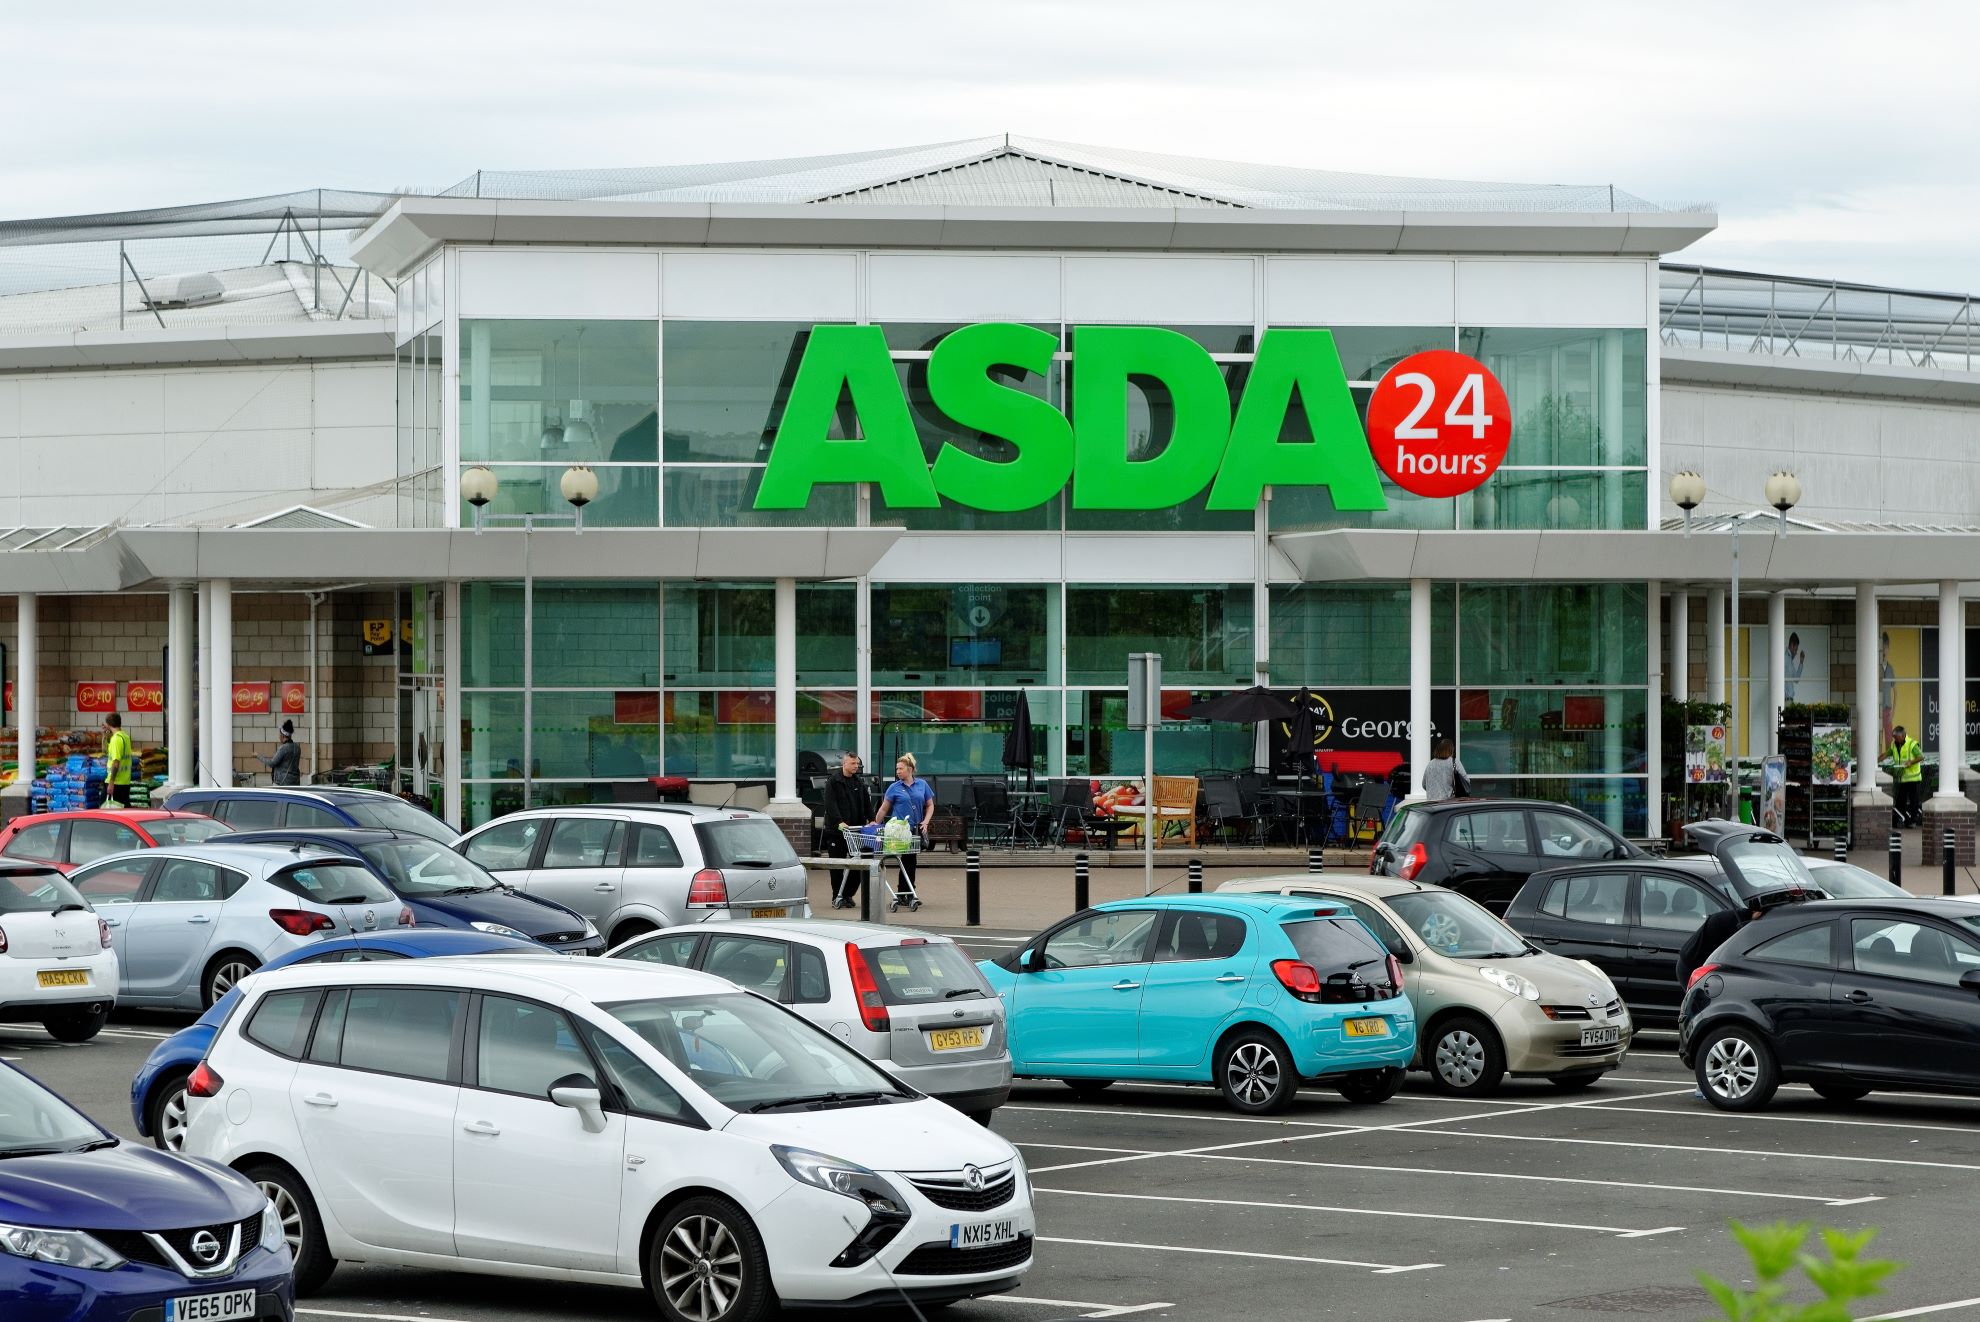 The shop front of an ASDA supermarket with lots of customers and cars outside.